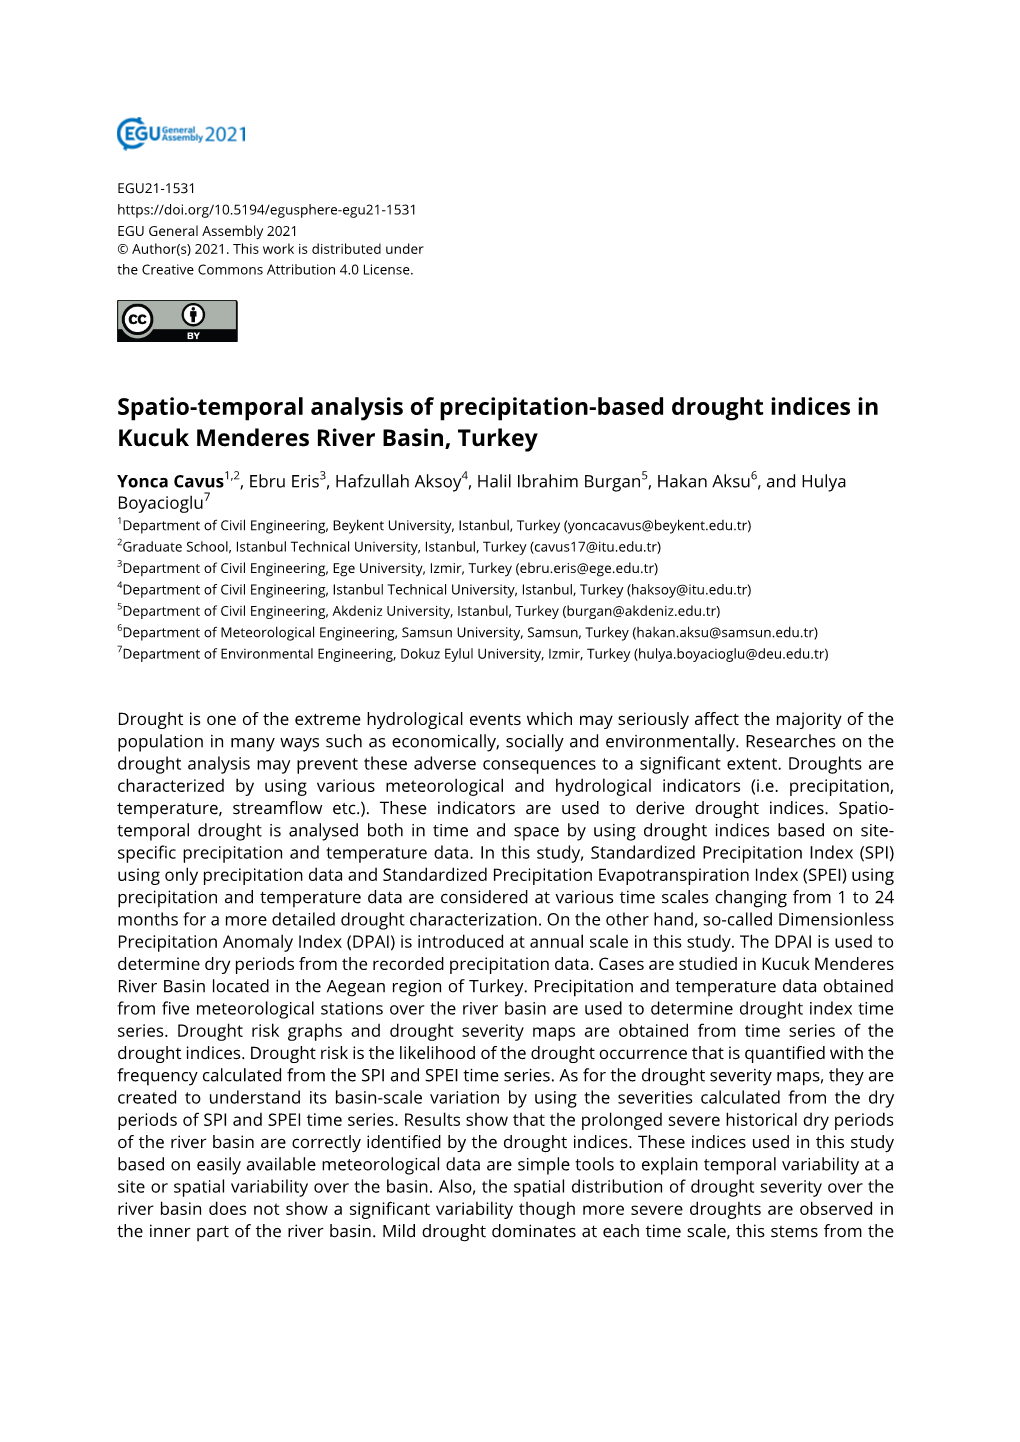 Spatio-Temporal Analysis of Precipitation-Based Drought Indices in Kucuk Menderes River Basin, Turkey